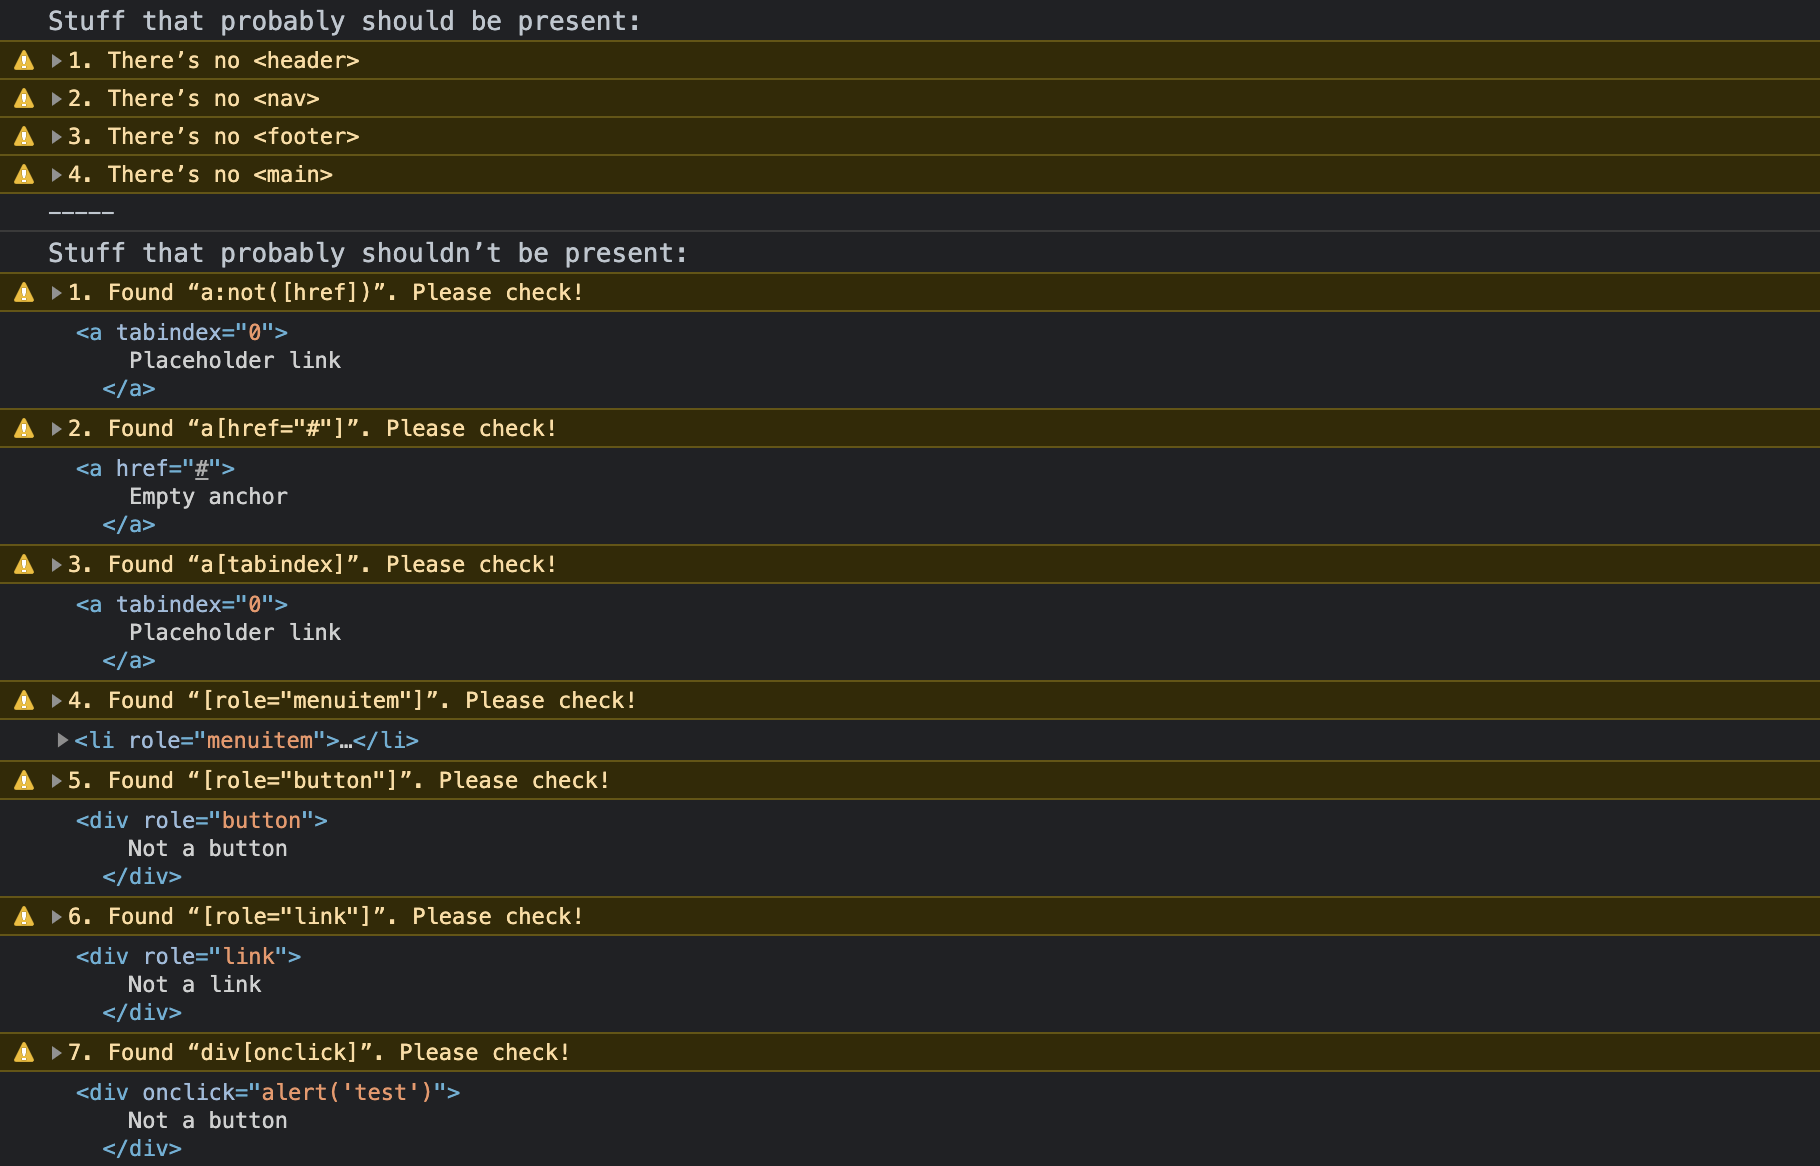 Demo output of the “Is x present?” script that lists a bunch of warning related to malformed HTML